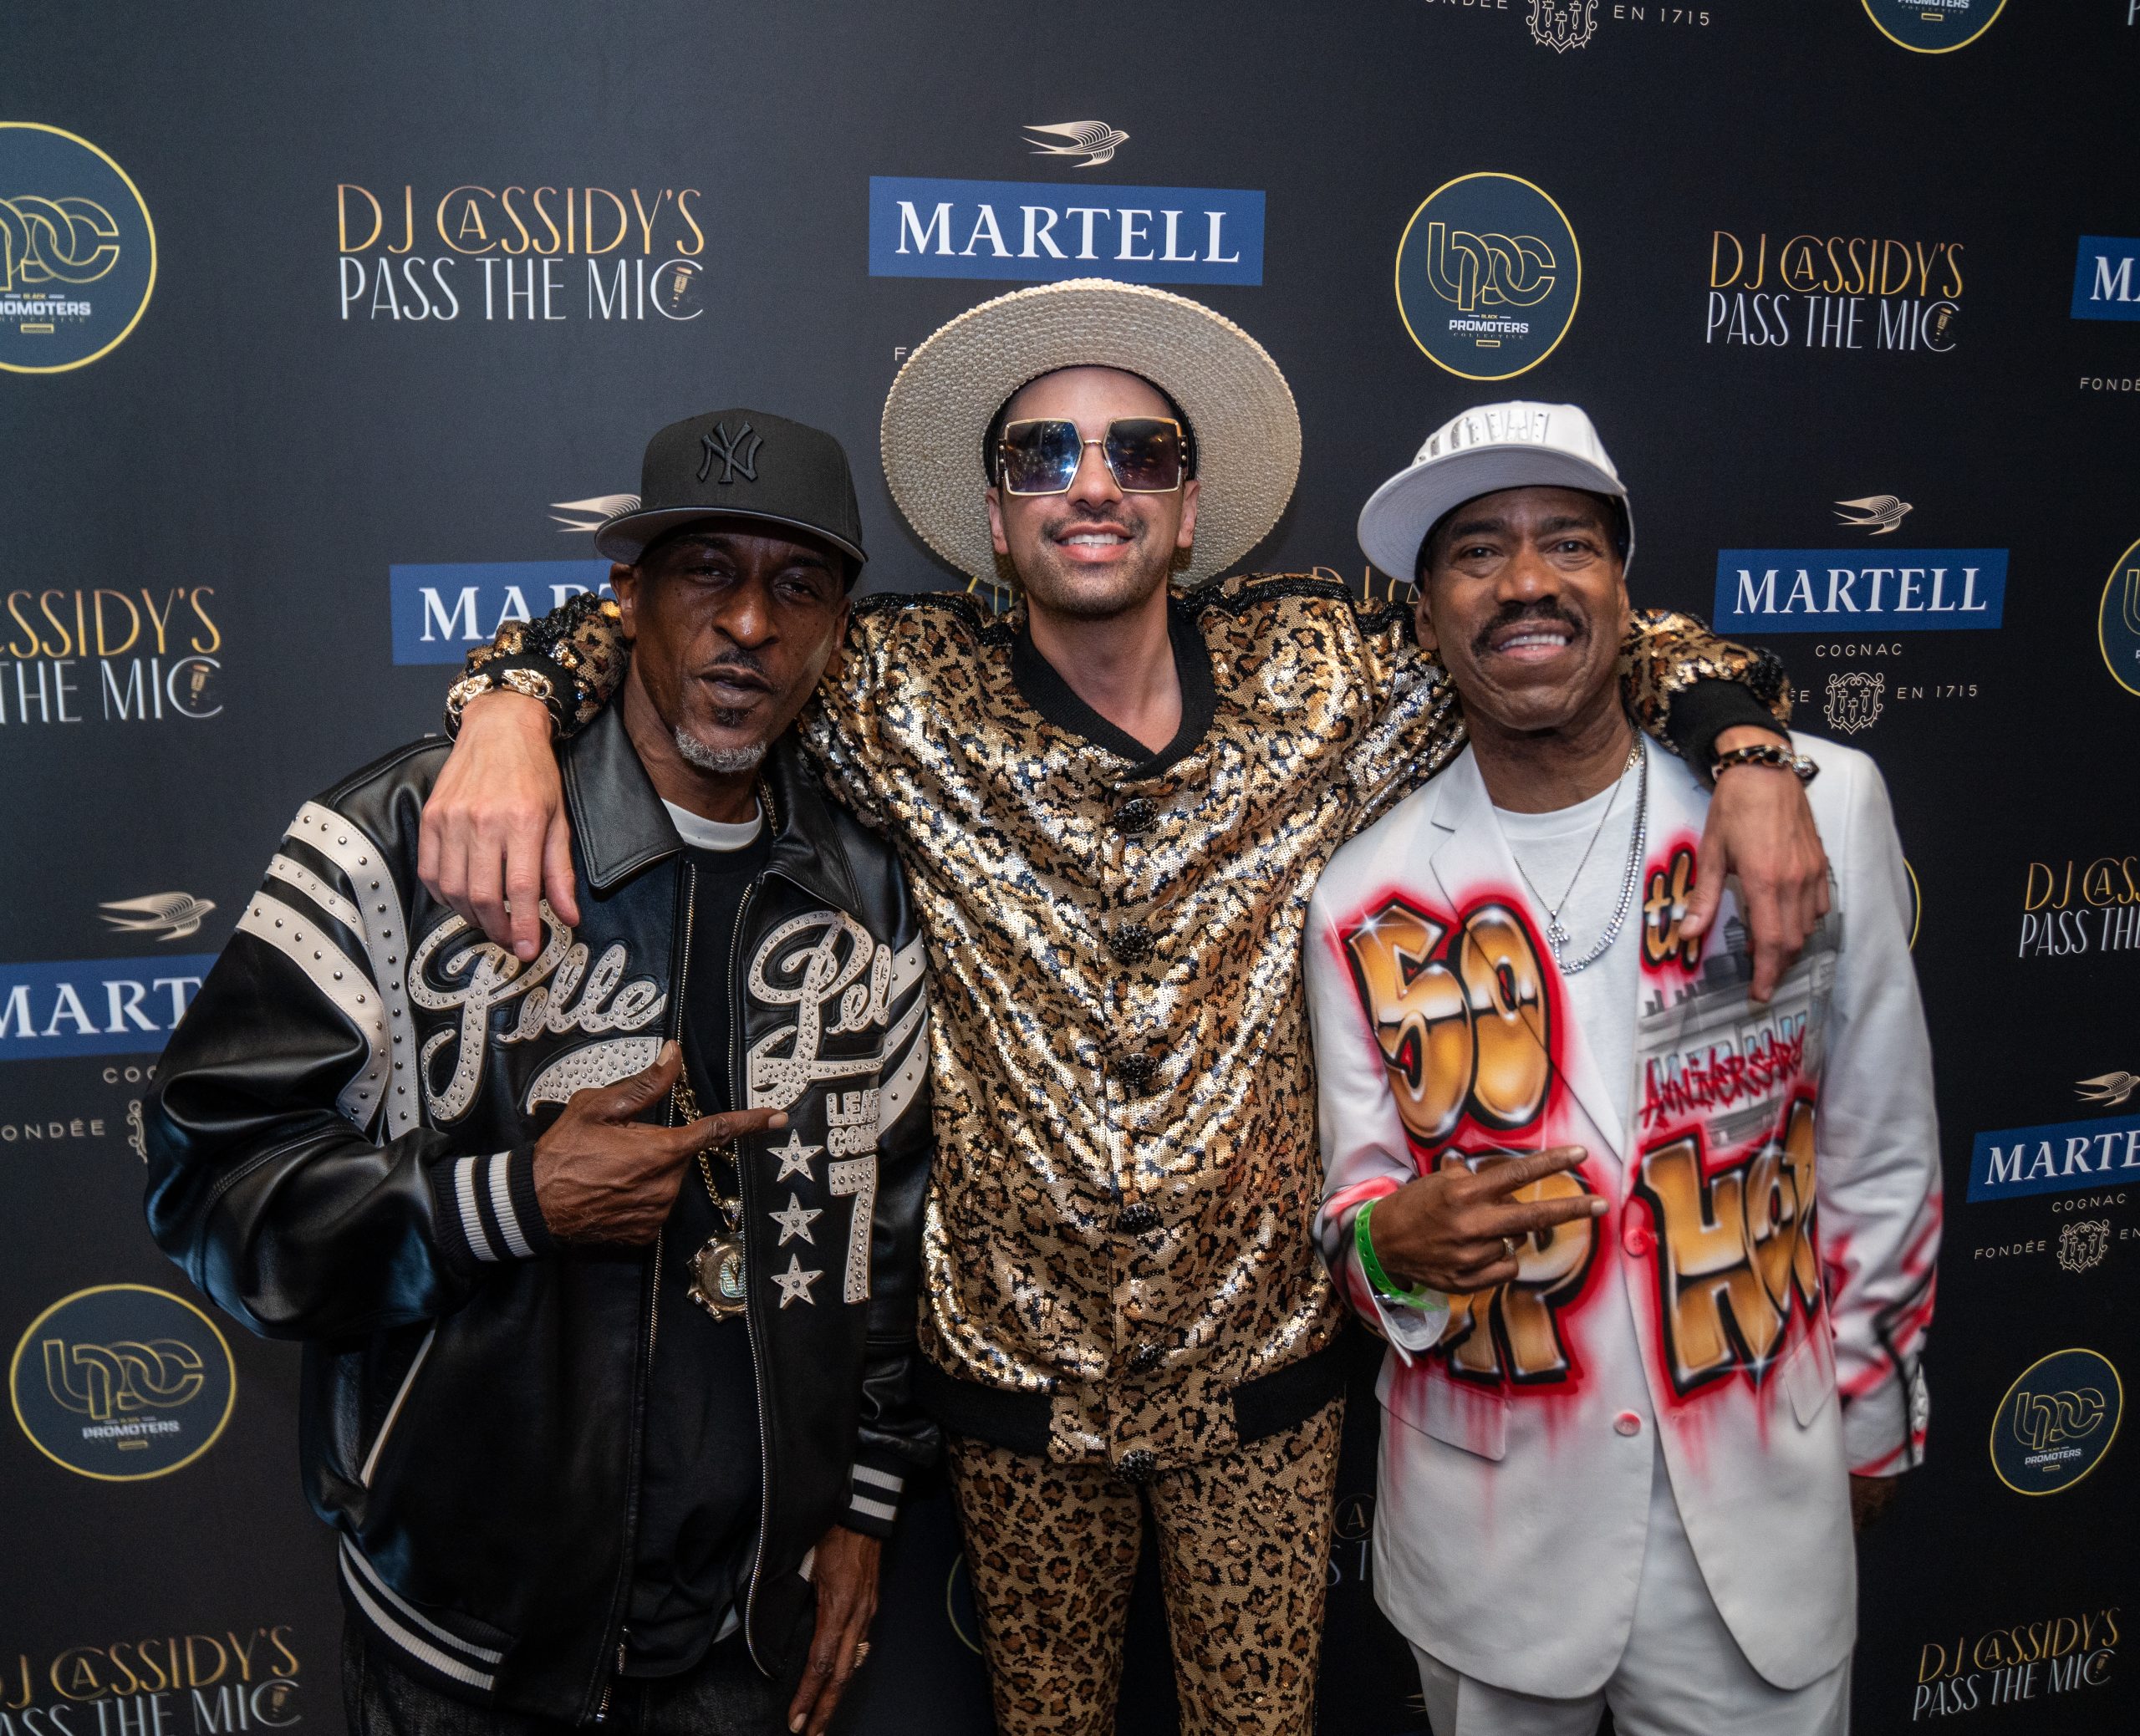 Rakim, DJ Cassidy, Kurtis Blow - Martell Cognac, The Black Promoters Collective, and Power 105.1 present DJ Cassidy's Pass The Mic LIVE at Radio City Music Hall in NYC